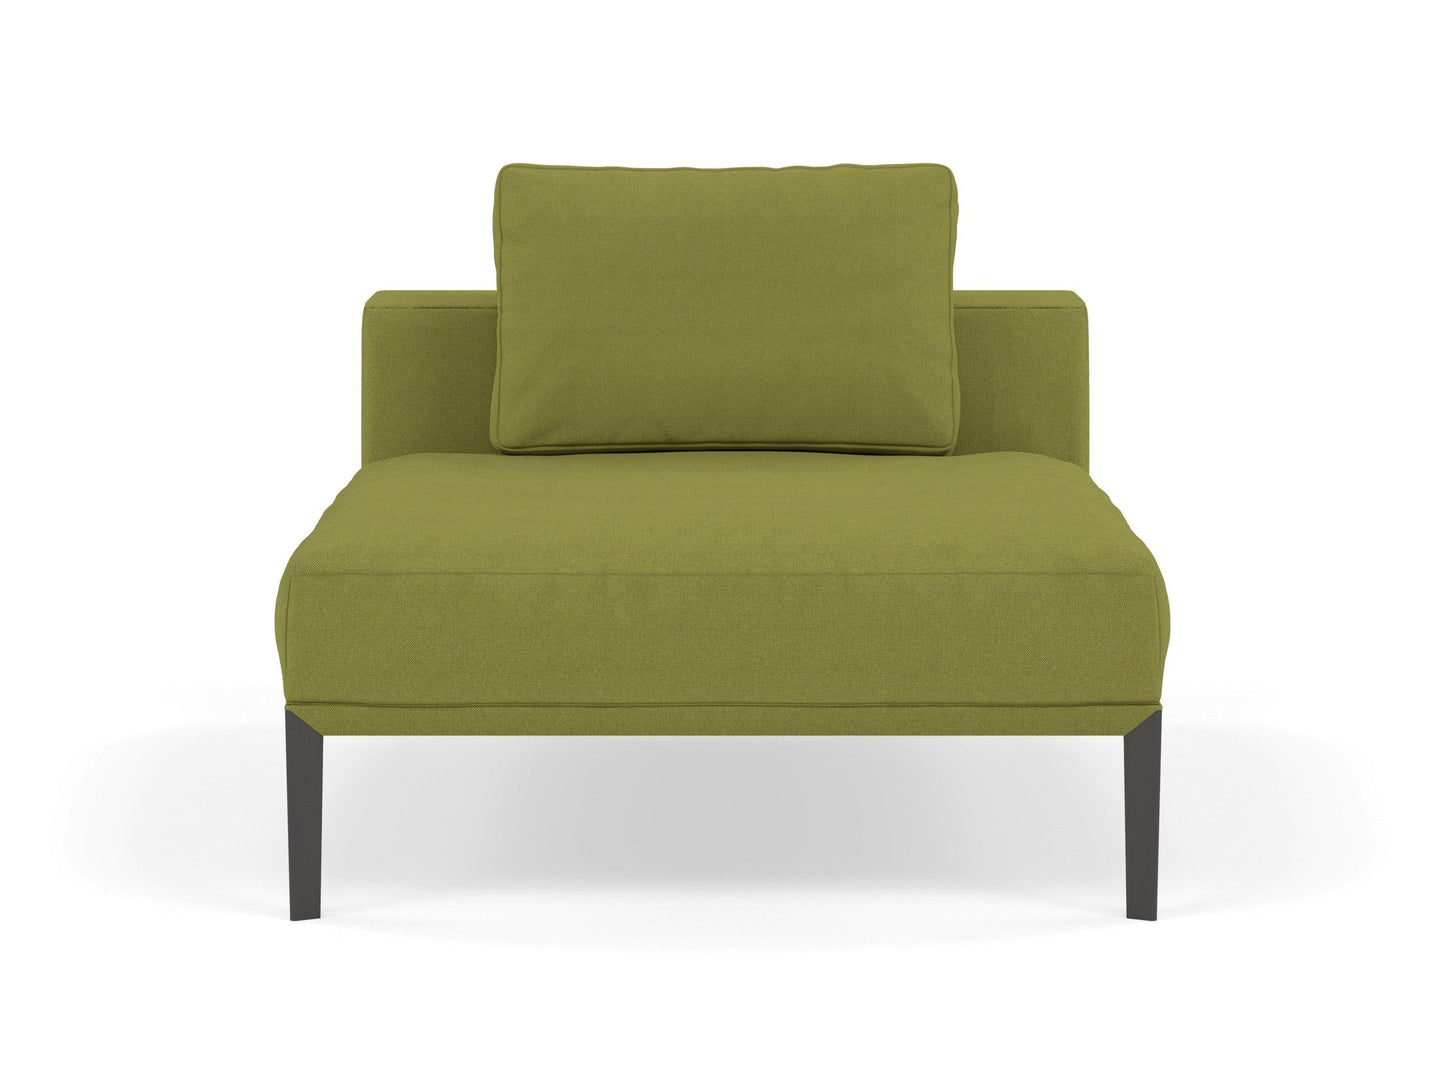 Modern Armchair 1 Seater Sofa without armrests in Lime Green Fabric-Wenge Oak-Distinct Designs (London) Ltd